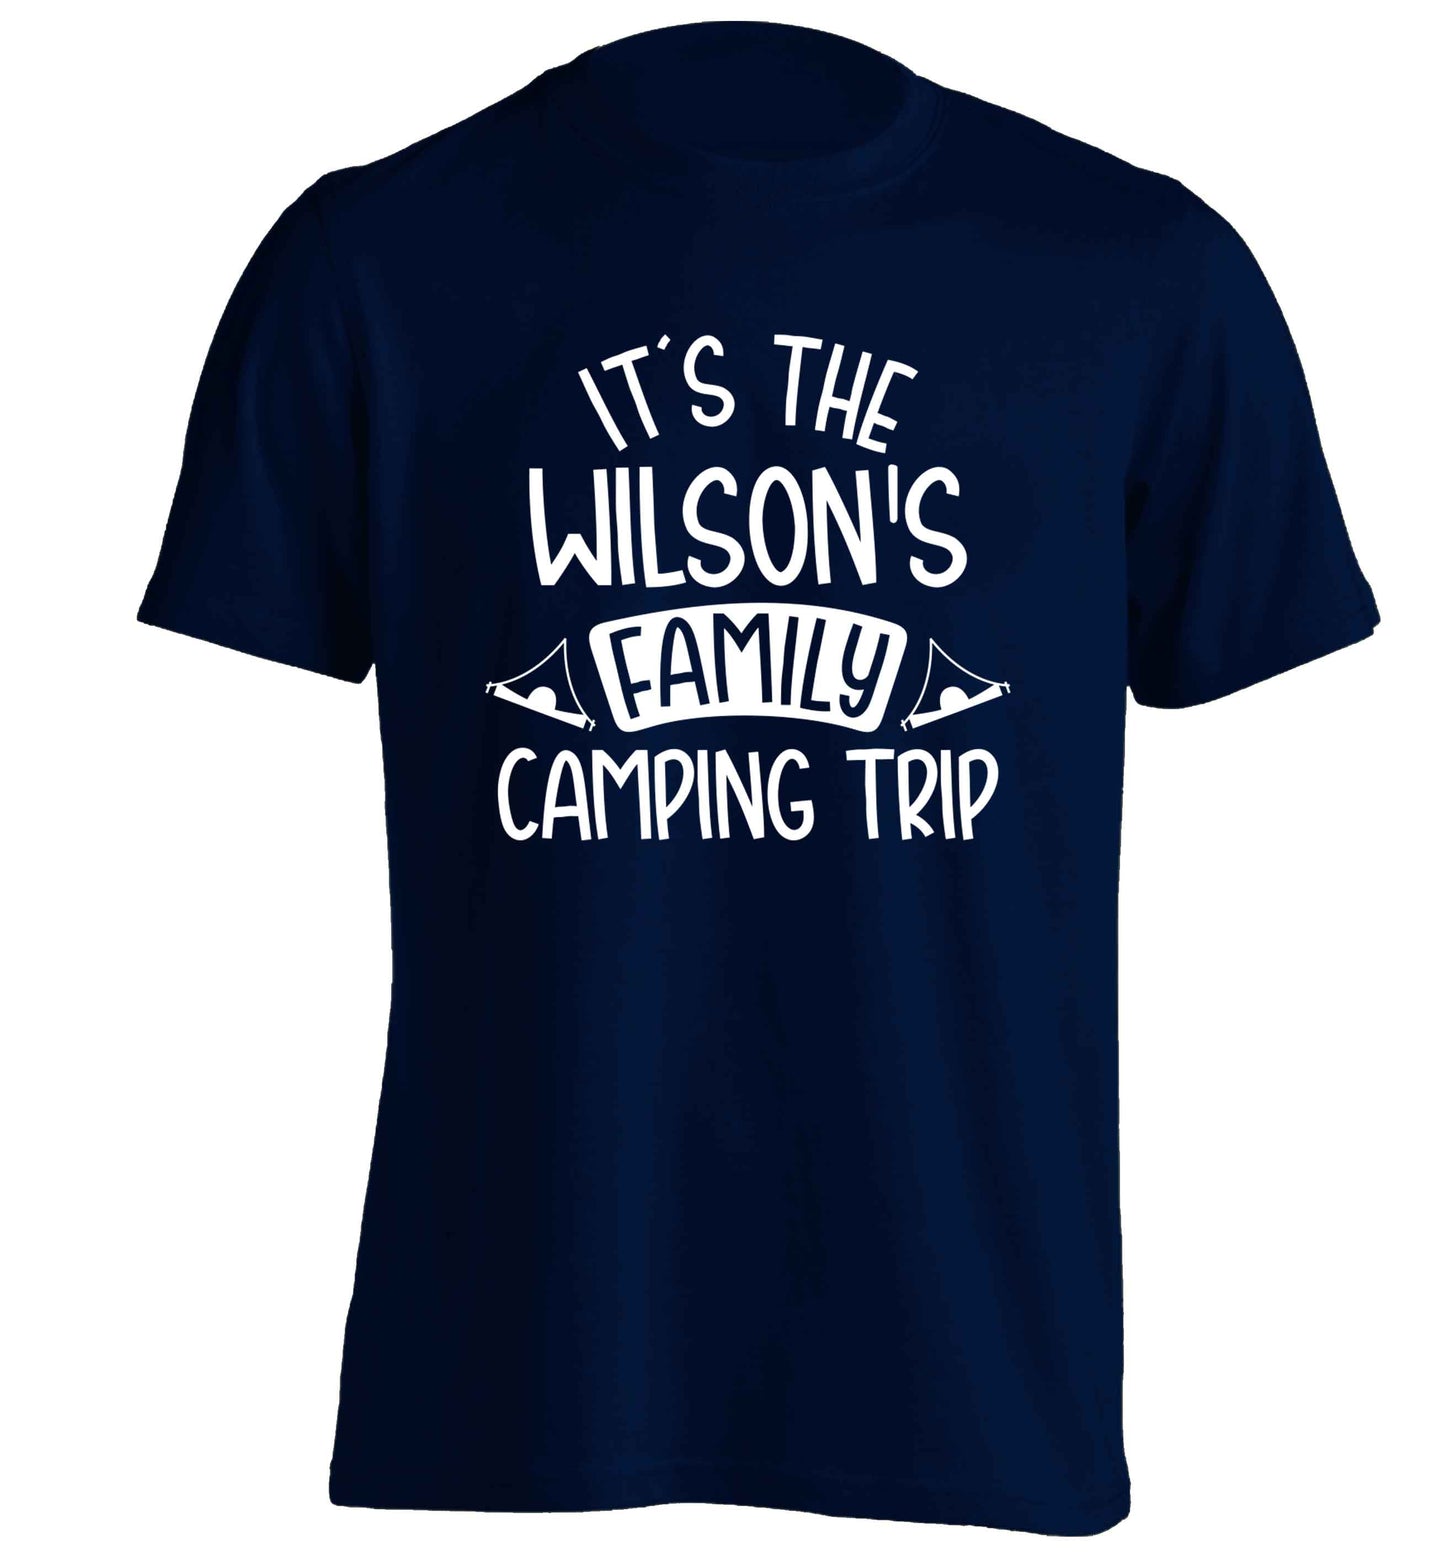 It's the Wilson's family camping trip personalised adults unisex navy Tshirt 2XL